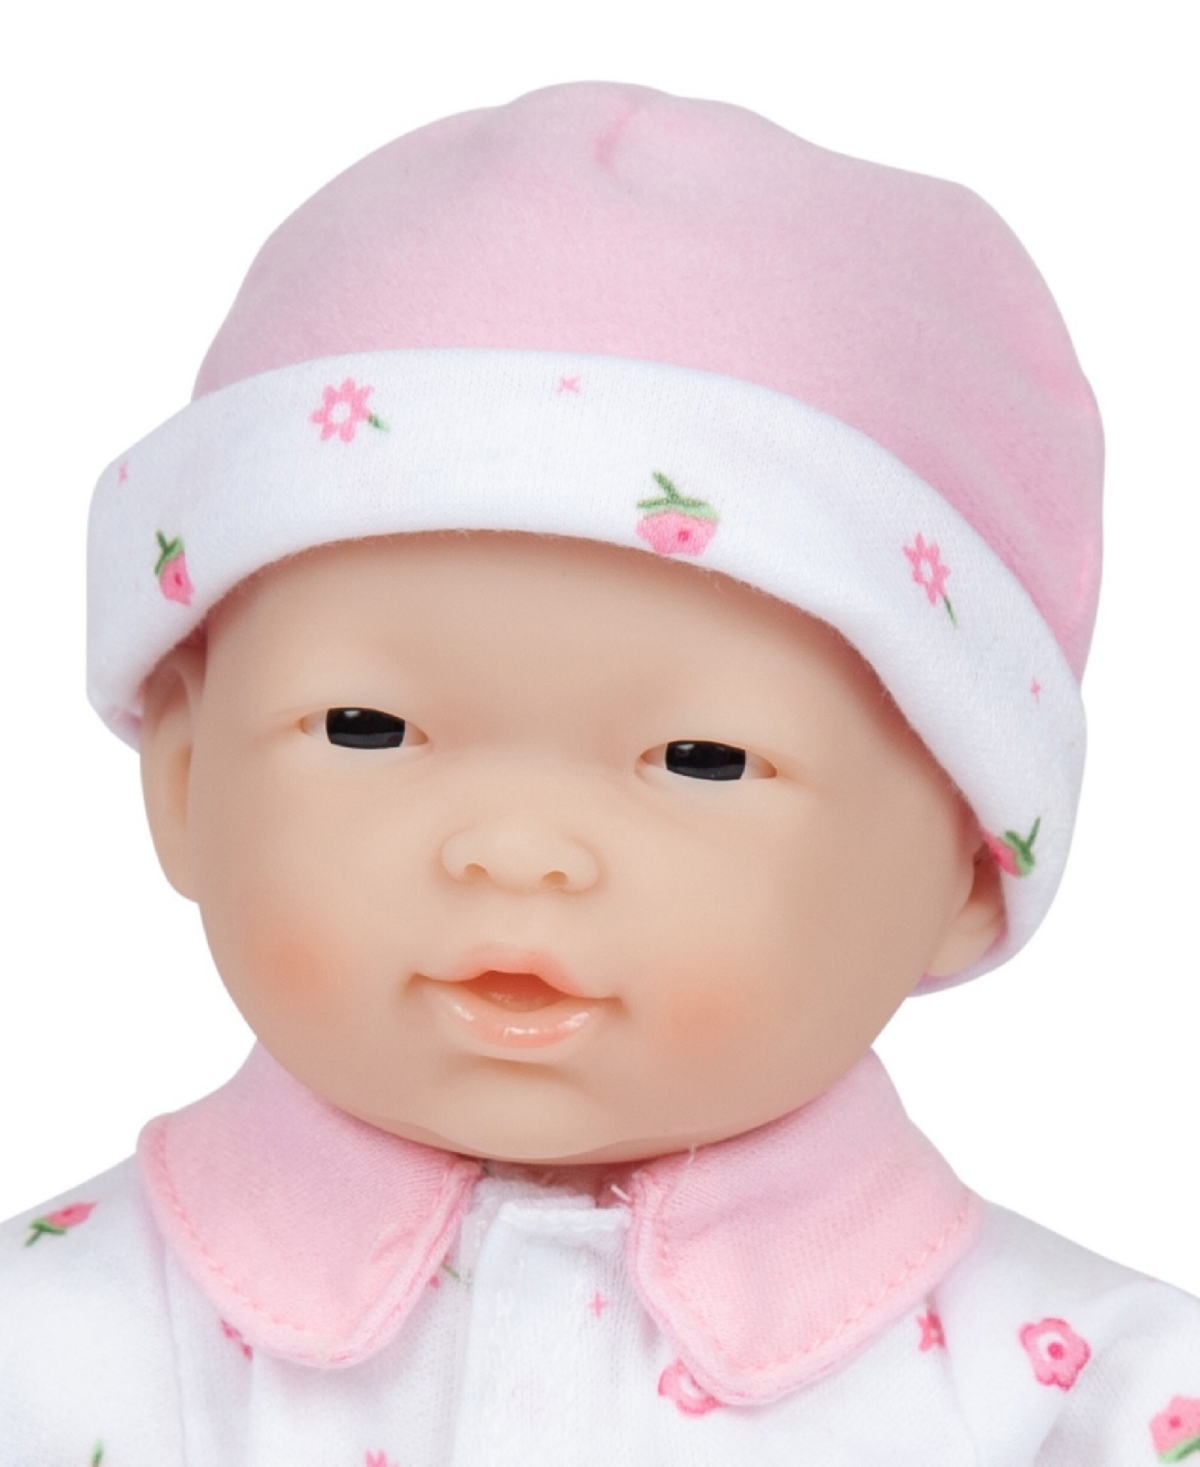 Shop Jc Toys La Baby Asian 11" Soft Body Baby Doll Pink Outfit In Asian - Pink